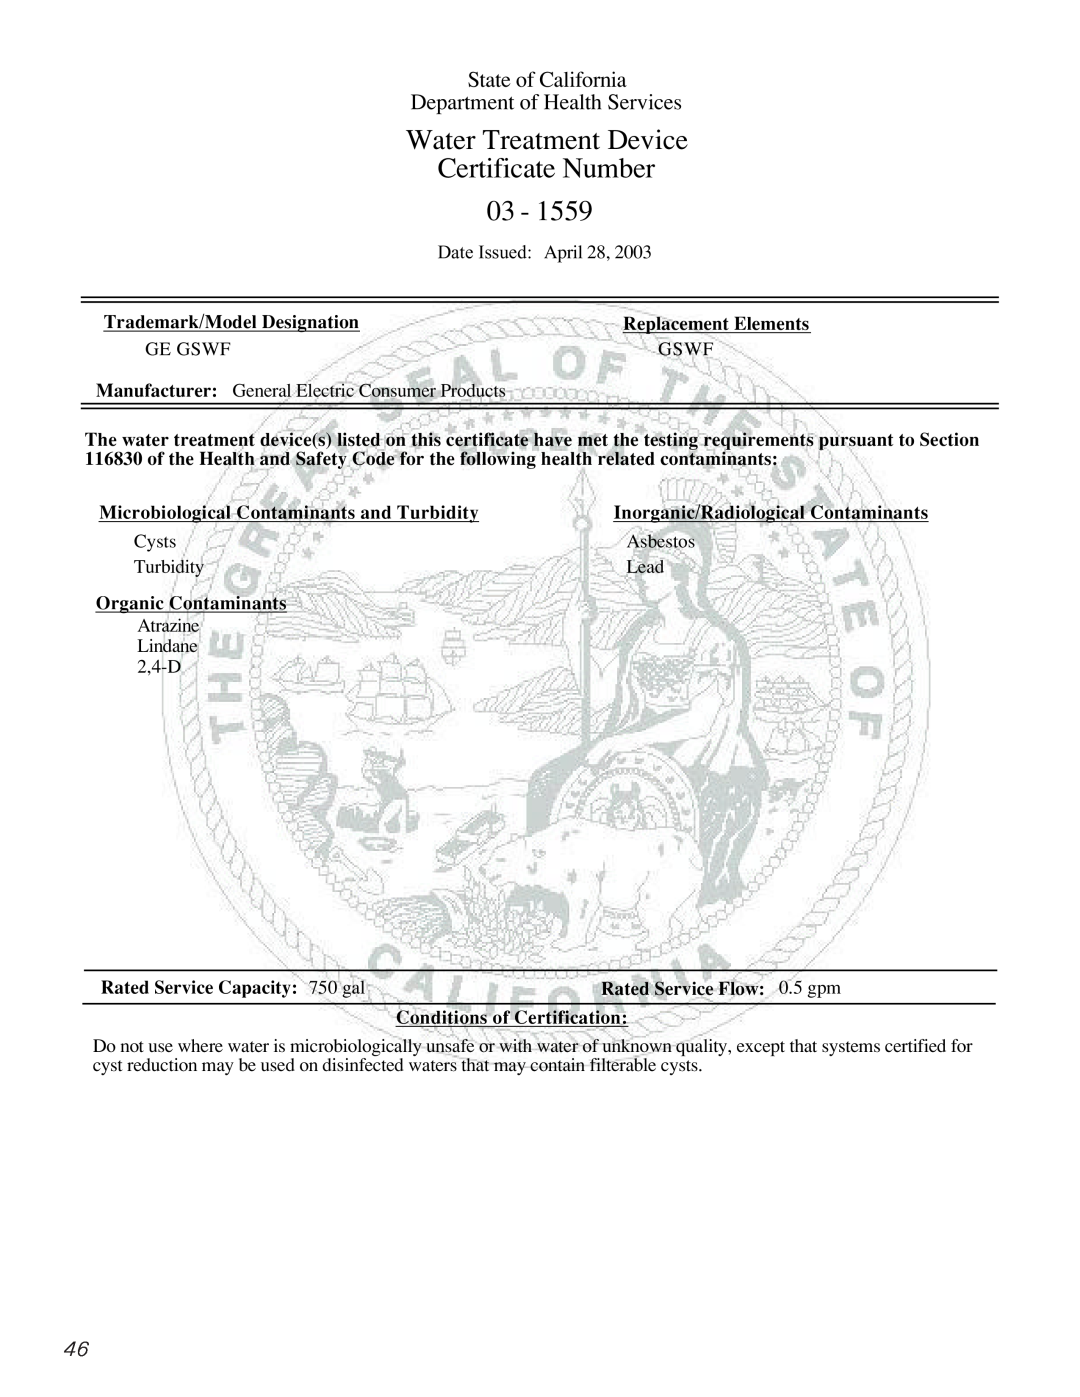 GE GDL22KCWSS manual State of California, Department of Health Services, Water Treatment Device, Certificate Number 